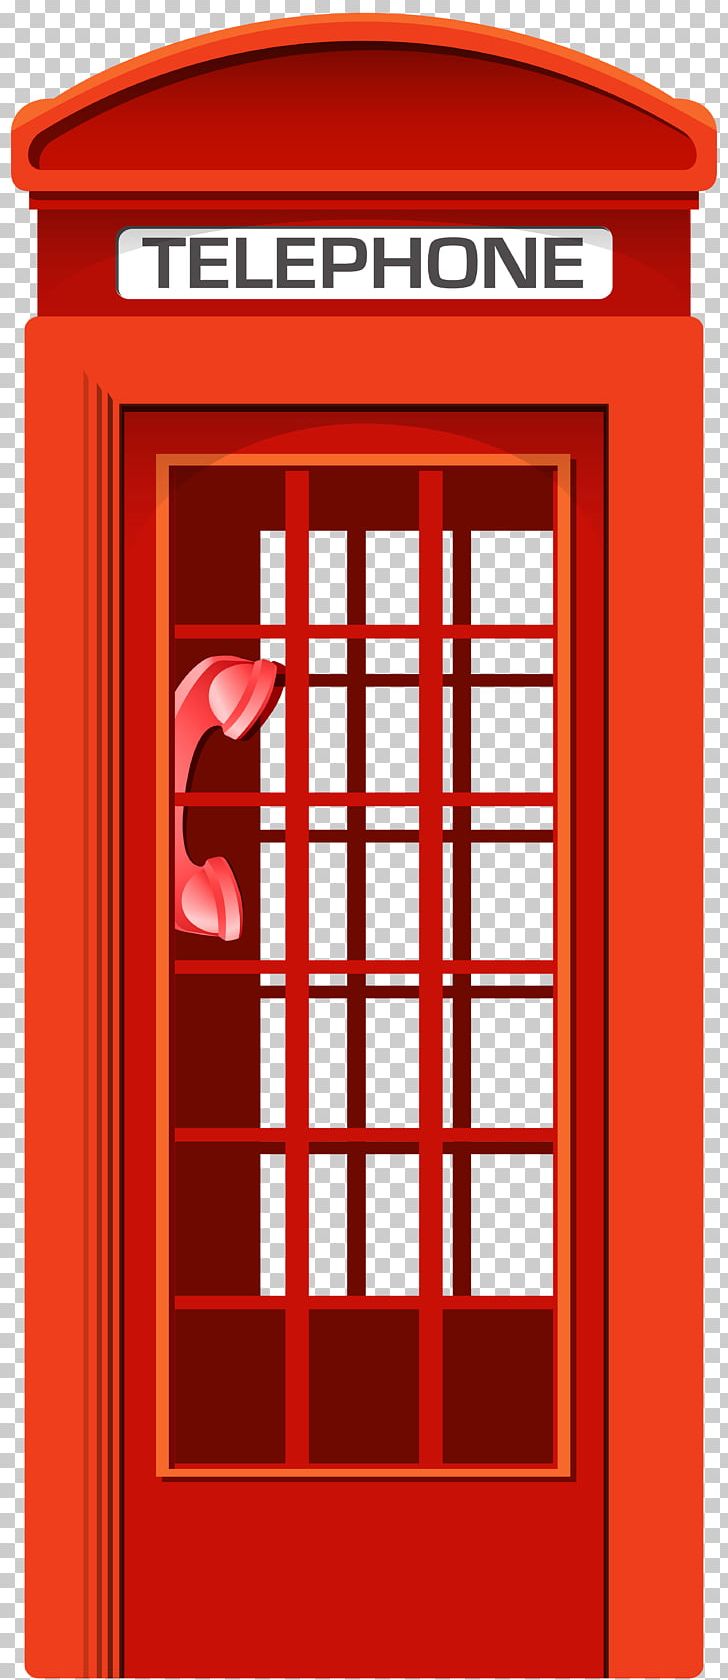 Telephone Booth Telephony Red Telephone Box PNG, Clipart, Area, Booth, Clip Art, Computer Icons, Image File Formats Free PNG Download